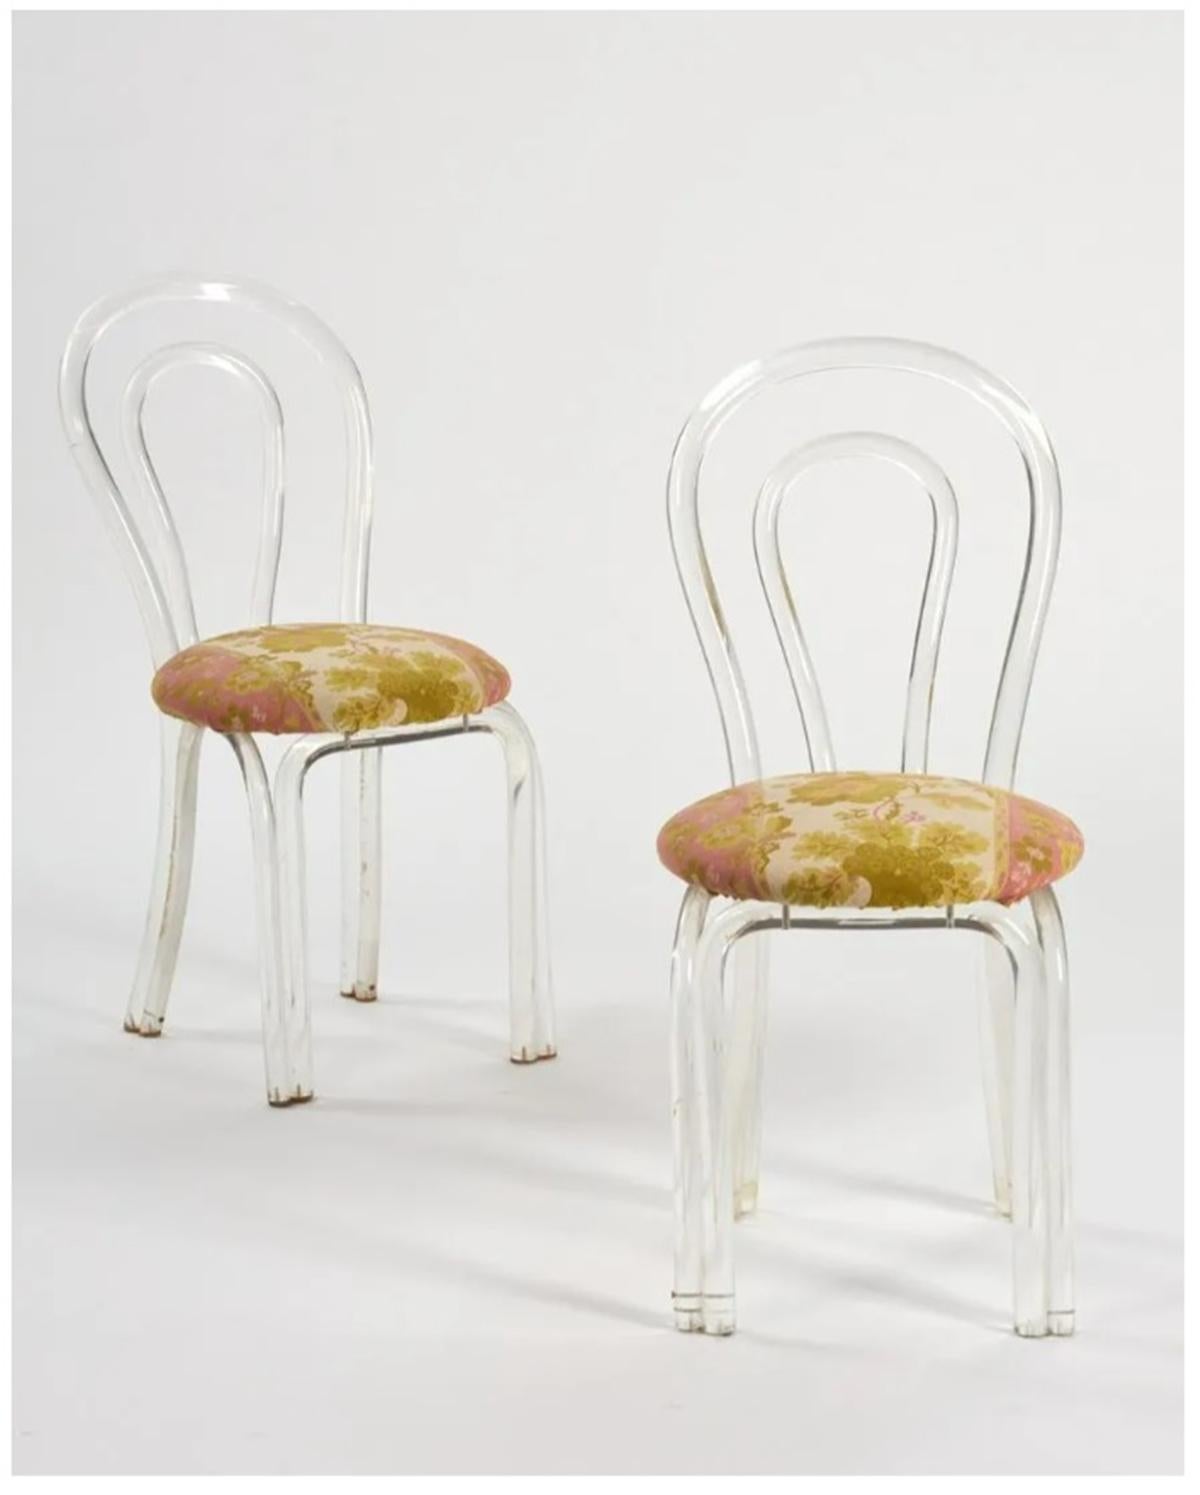 Beautiful pair of Lucite side or vanity chairs attributed to Dorothy Thorpe.
The chairs are made of solid Lucite rods bent to create a beautiful shape for the back and legs of these chairs.

The chairs retain the original fabric and the Lucite is